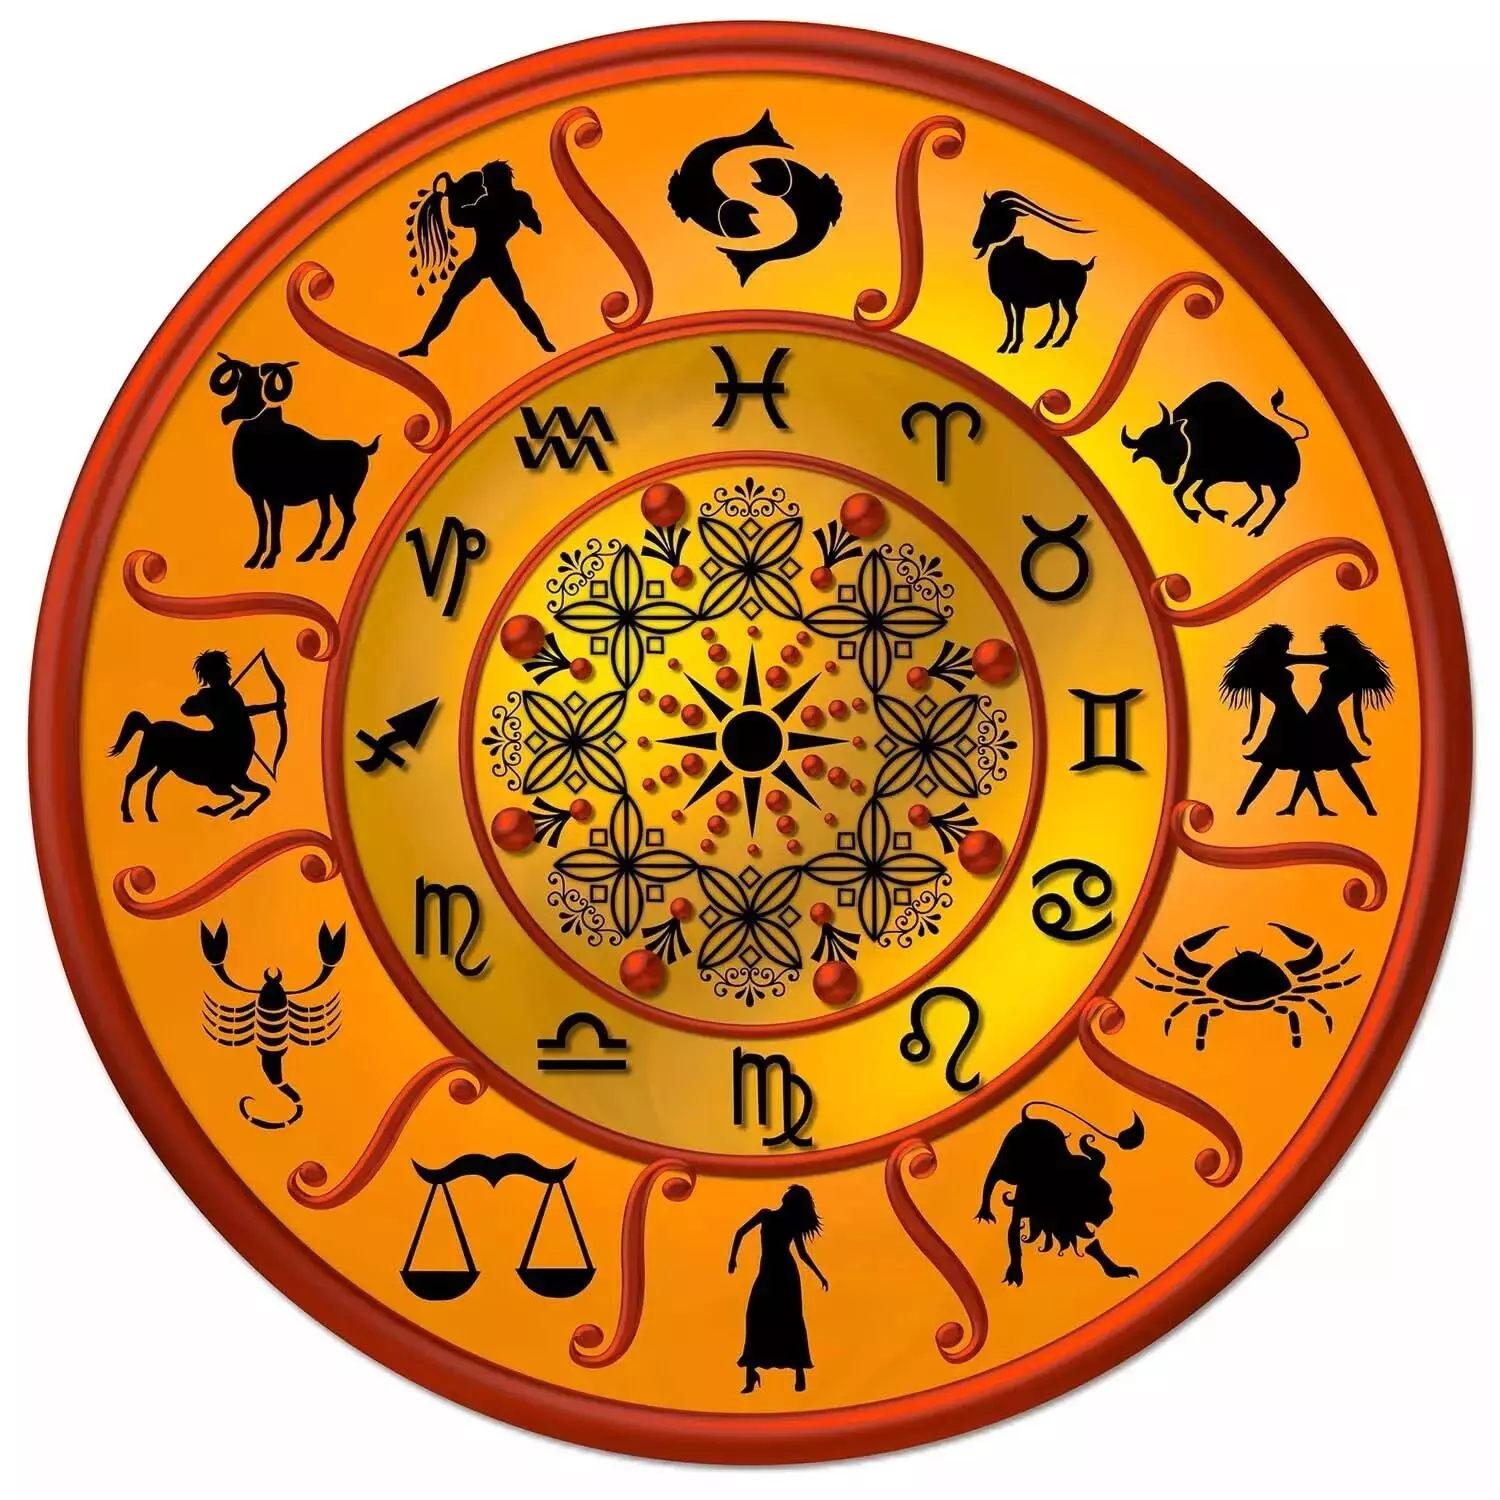 31  October  – Know your todays horoscope